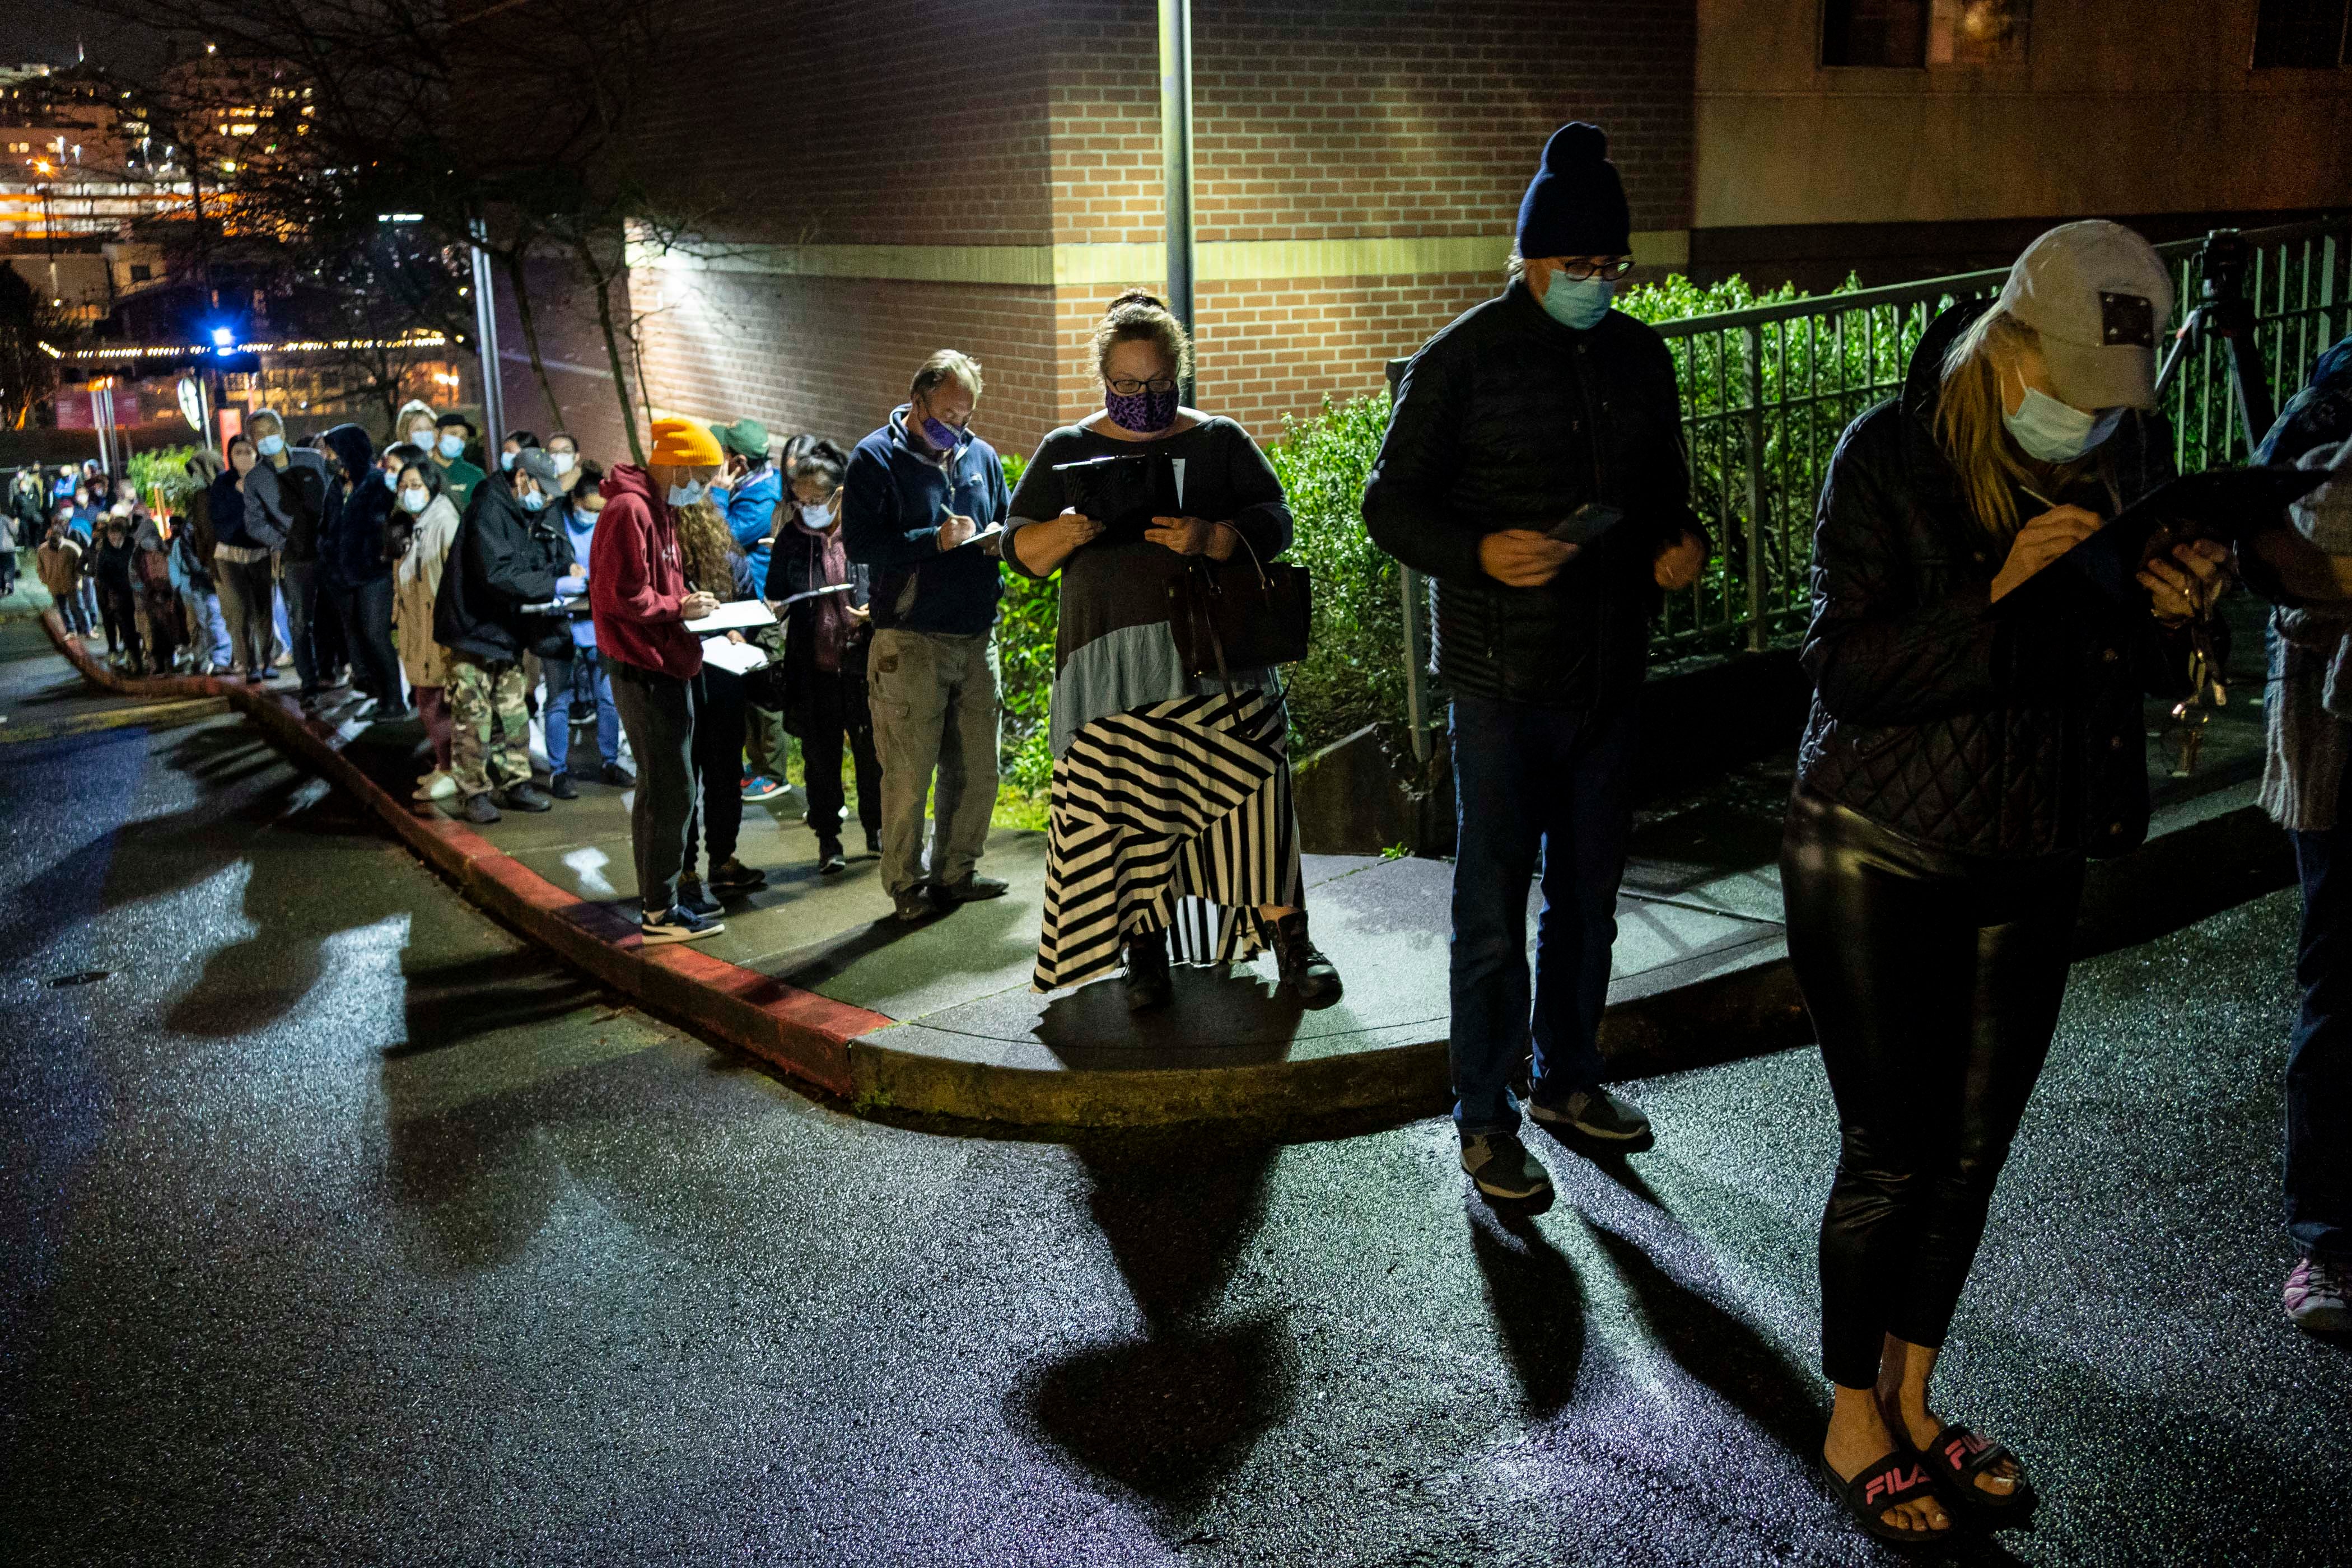 People wait in line for a last-minute COVID-19 vaccine event at Seattle University after a freezer failure at a nearby hospital on January 29, 2021 in Seattle, Washington. The impromptu overnight event was one of three in the city, organized late at night at two University of Washington vaccine clinics and one Swedish Health Services vaccine clinic, to ensure COVID-19 vaccine doses from an area hospital did not go to waste.